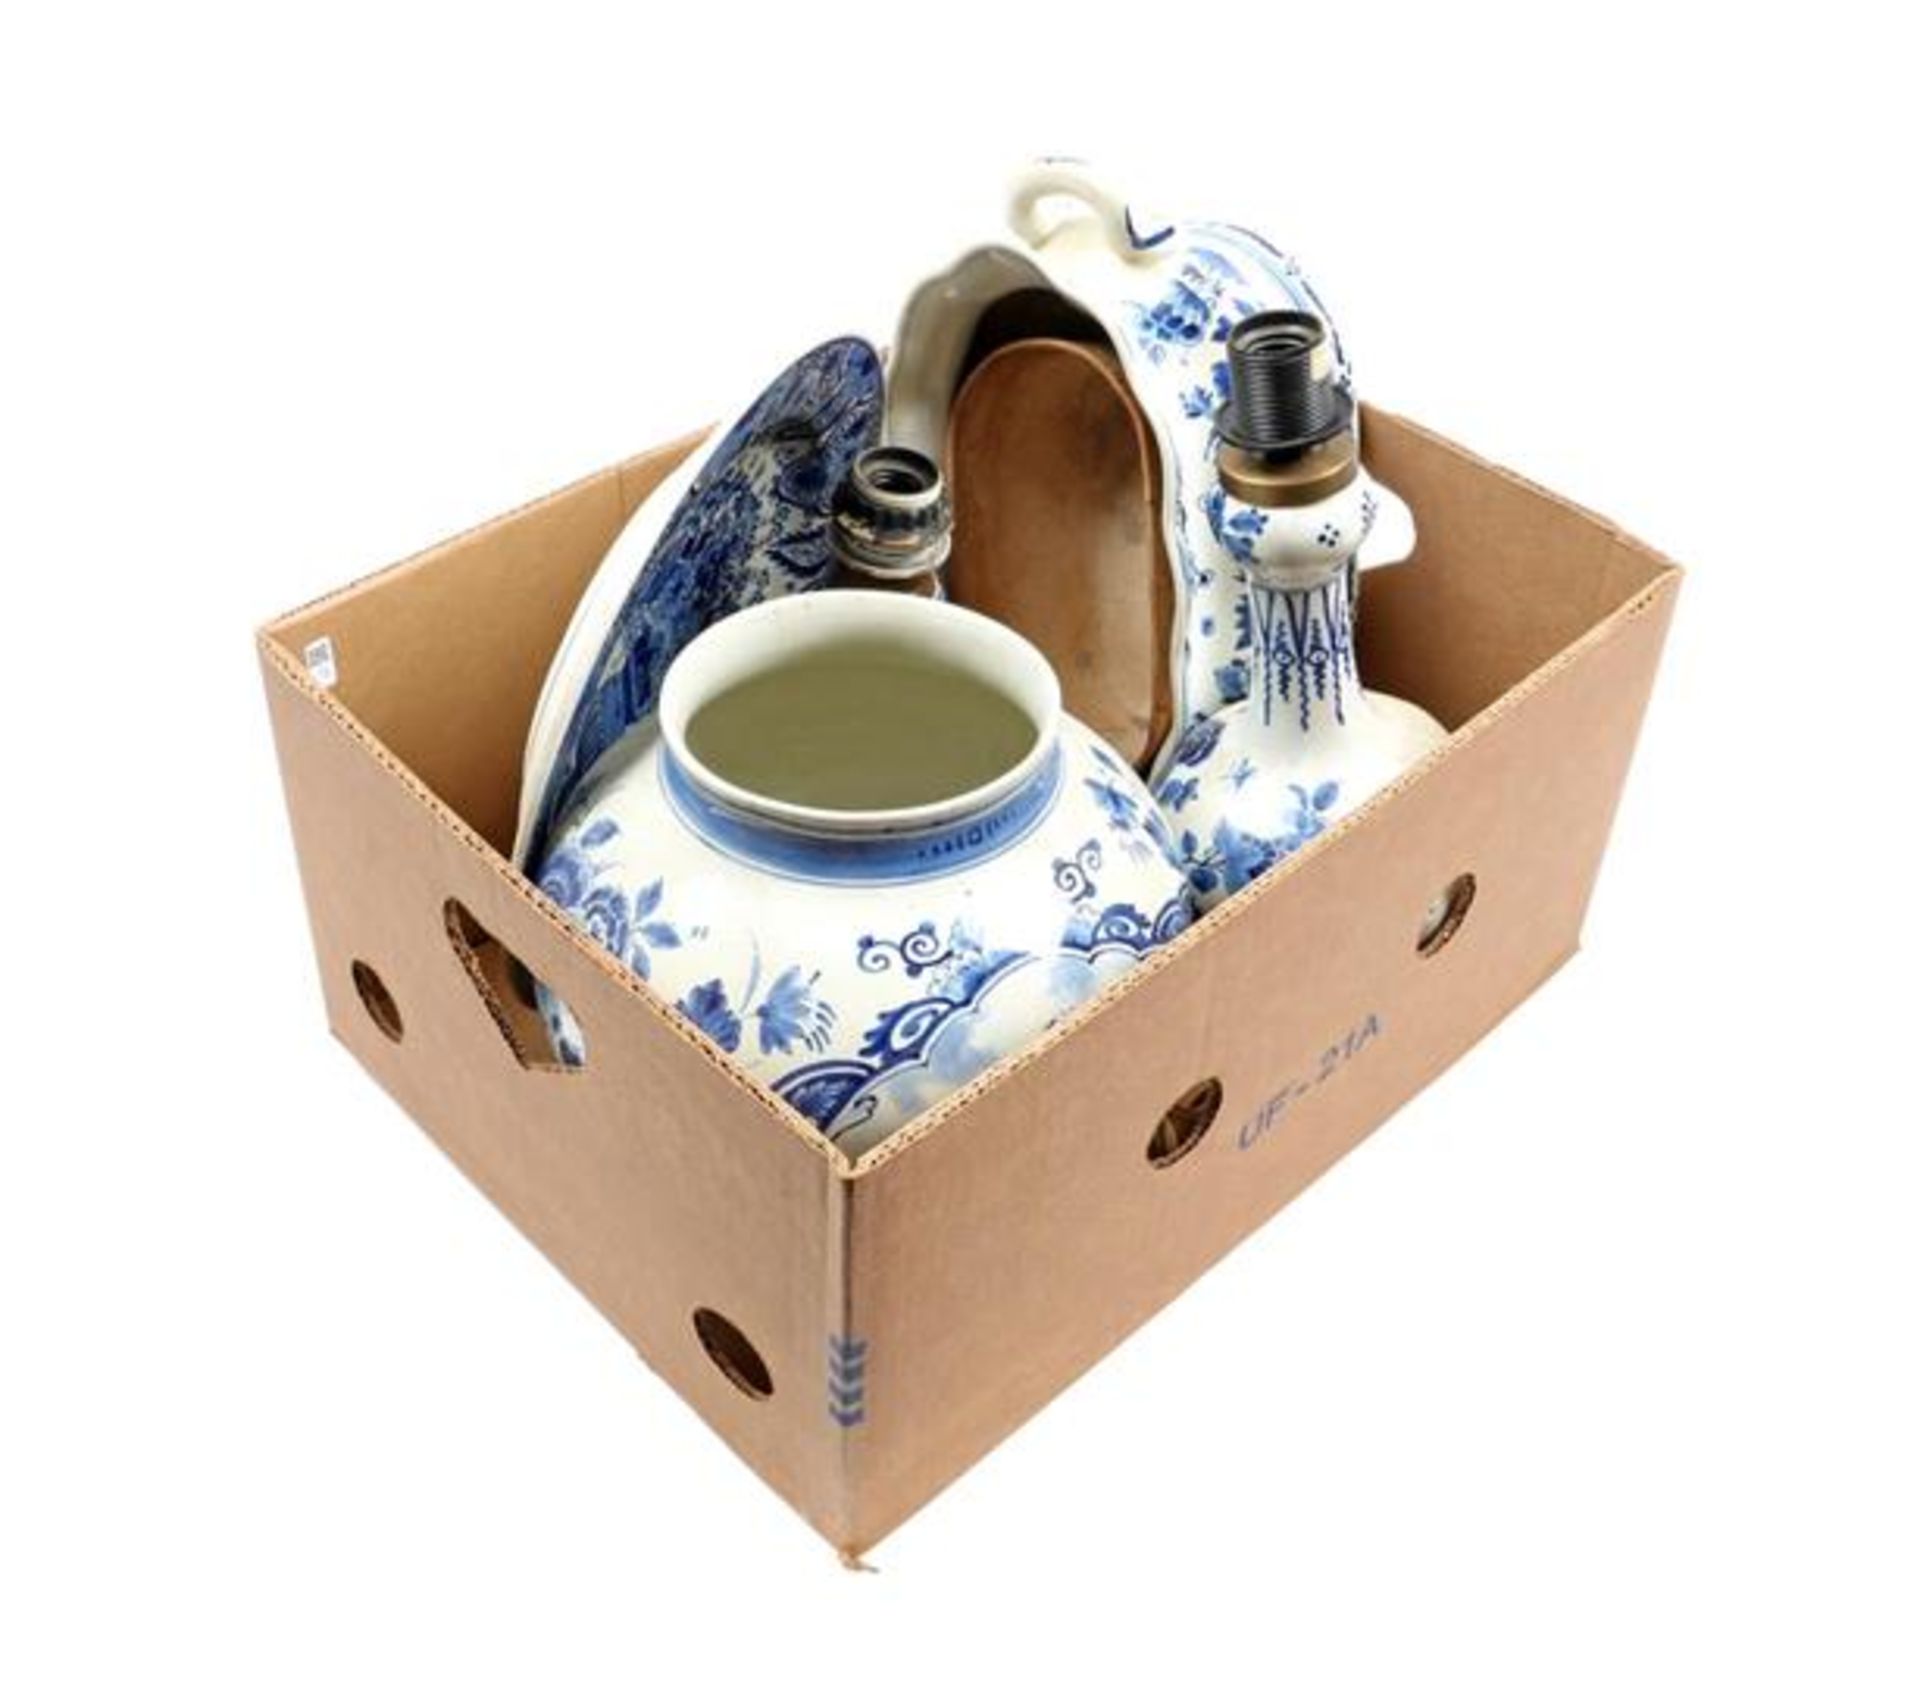 Box with Porceleyne Fles Delft earthenware jardiniere, 2 table lamp feet, ball vase and saucer (